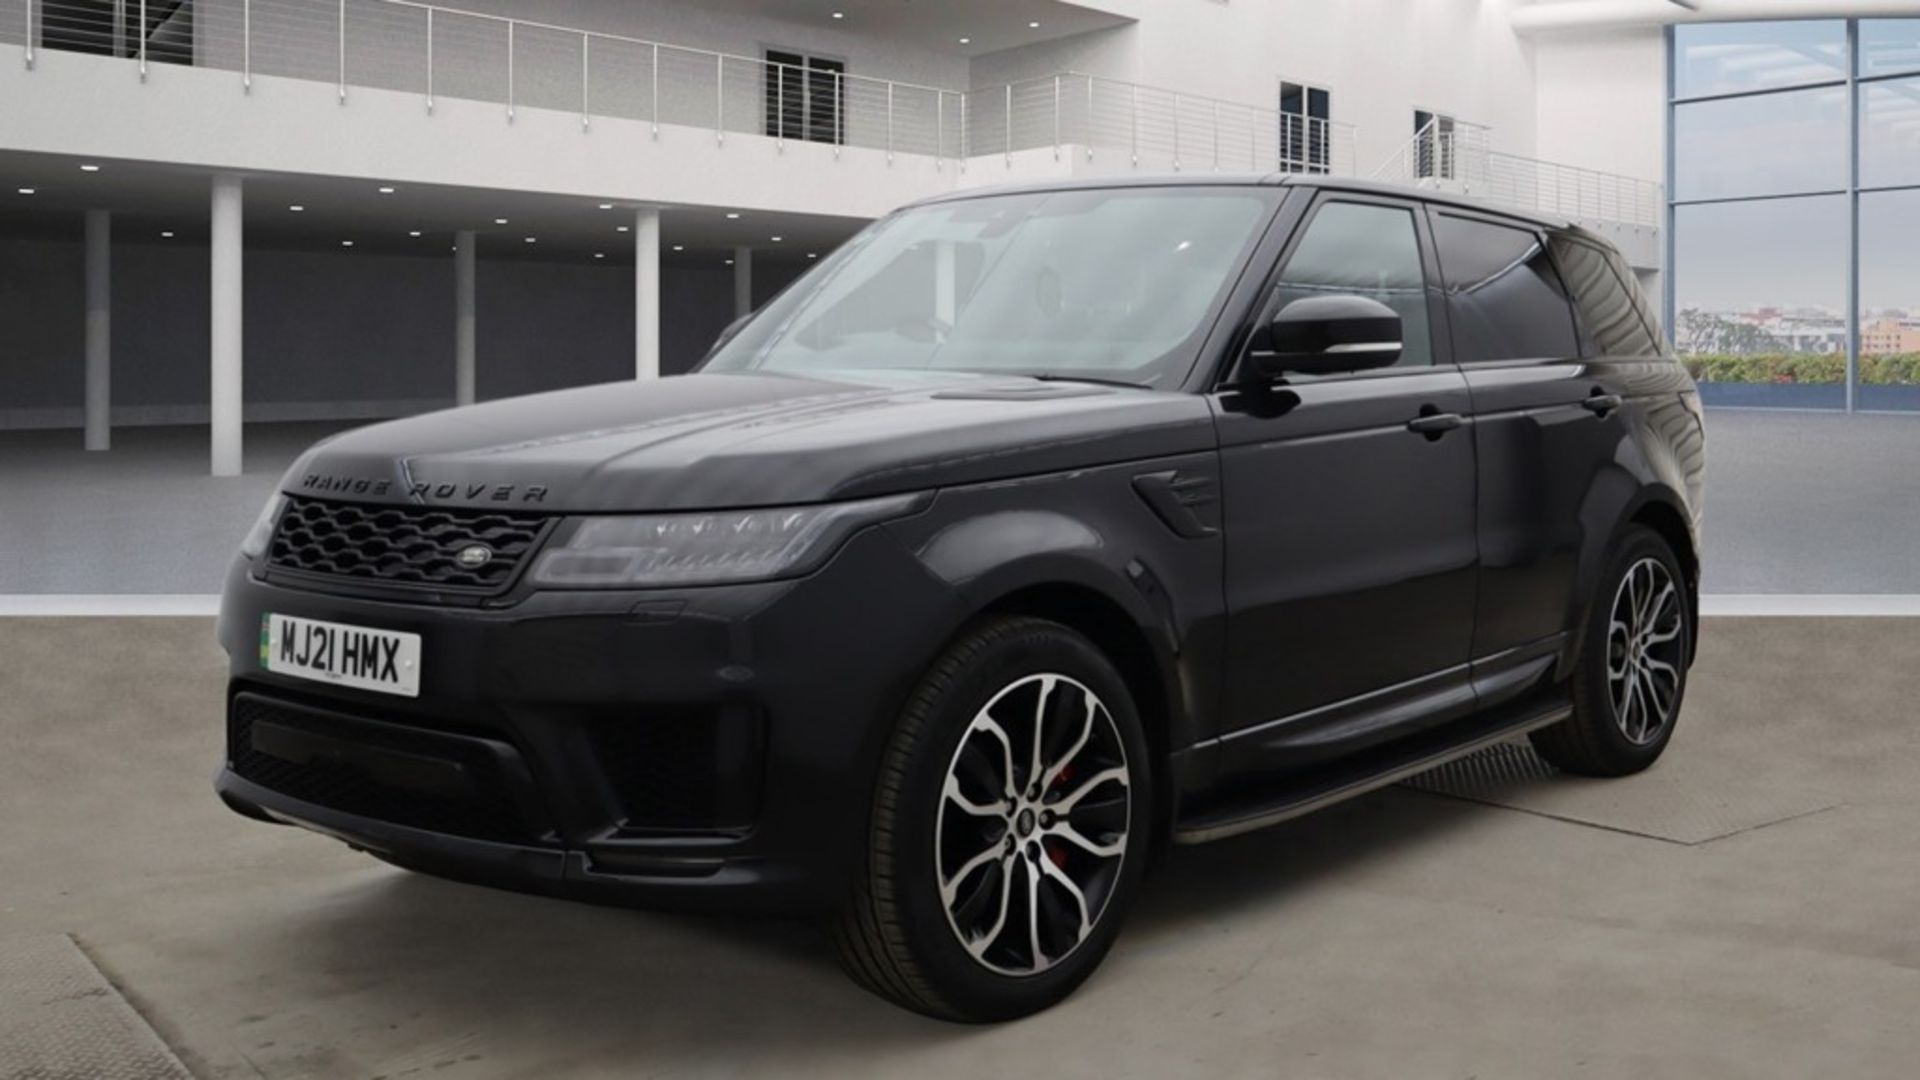 ** ON SALE ** Land Rover Range Rover Sport 2.0 P400E Autobiography Dynamic 2021'21 Reg' - Image 2 of 9